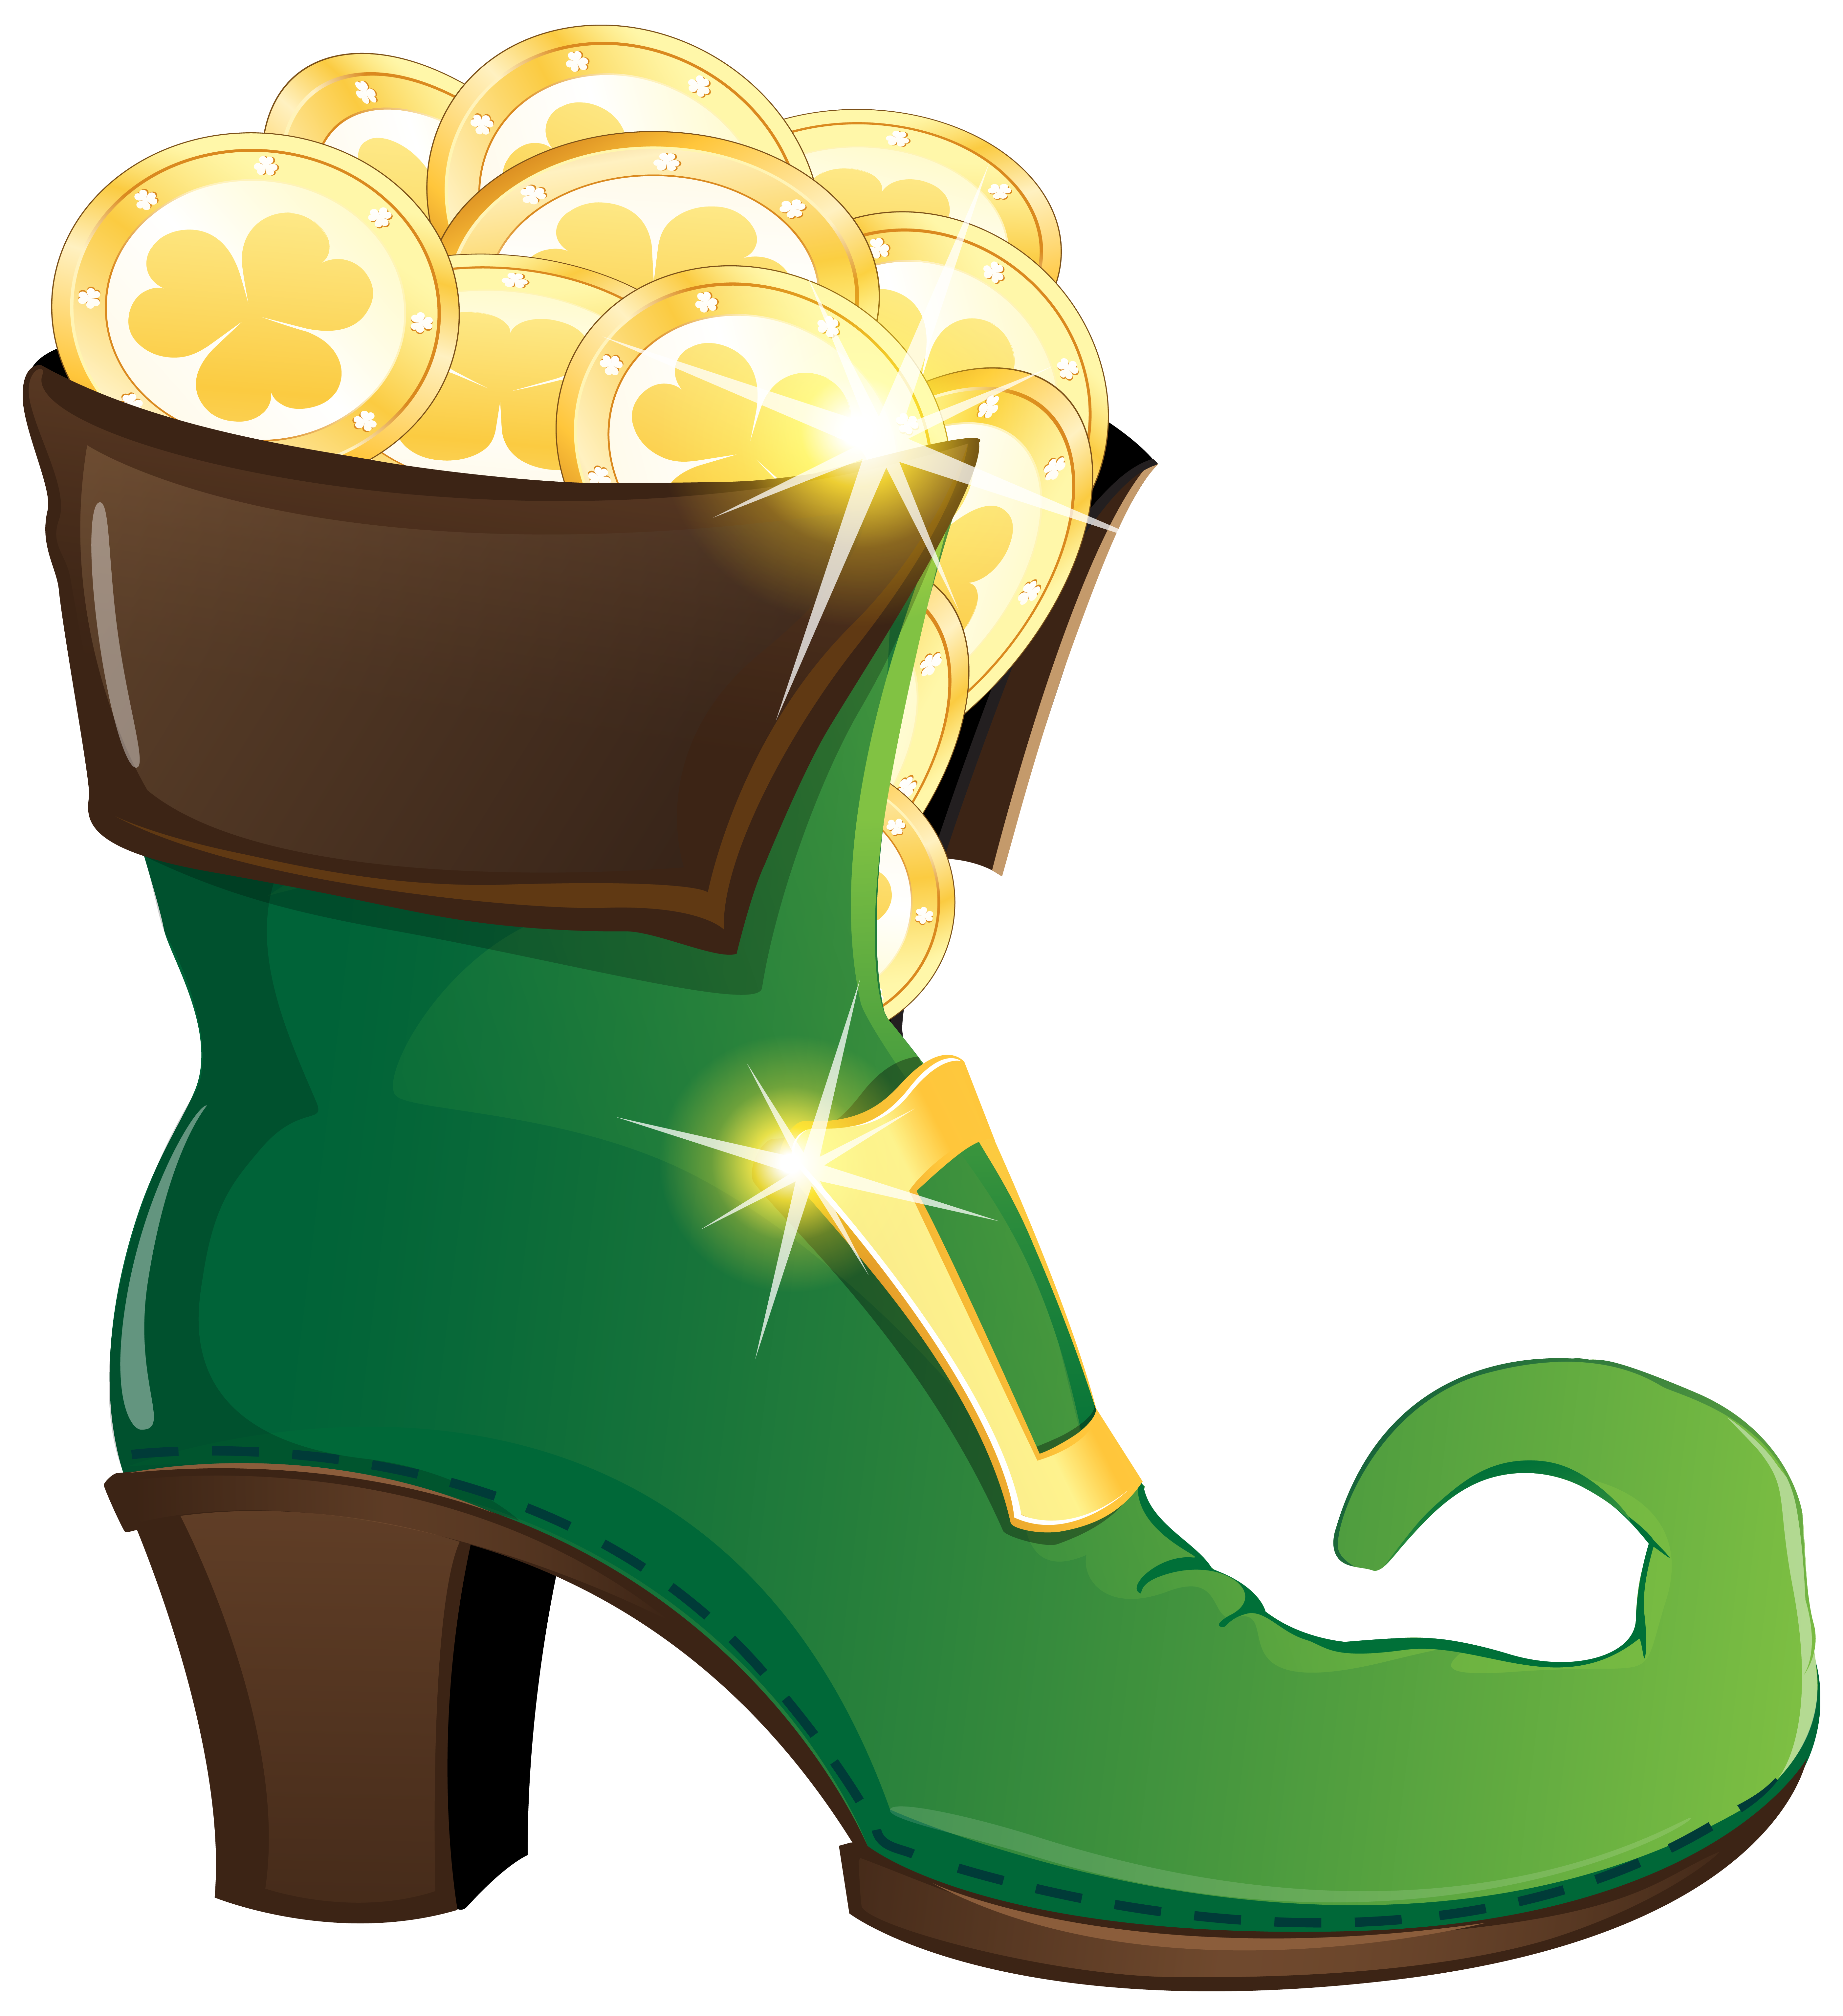 Gold Coins Boot Footwear Leprechaun High-Heeled With Clipart